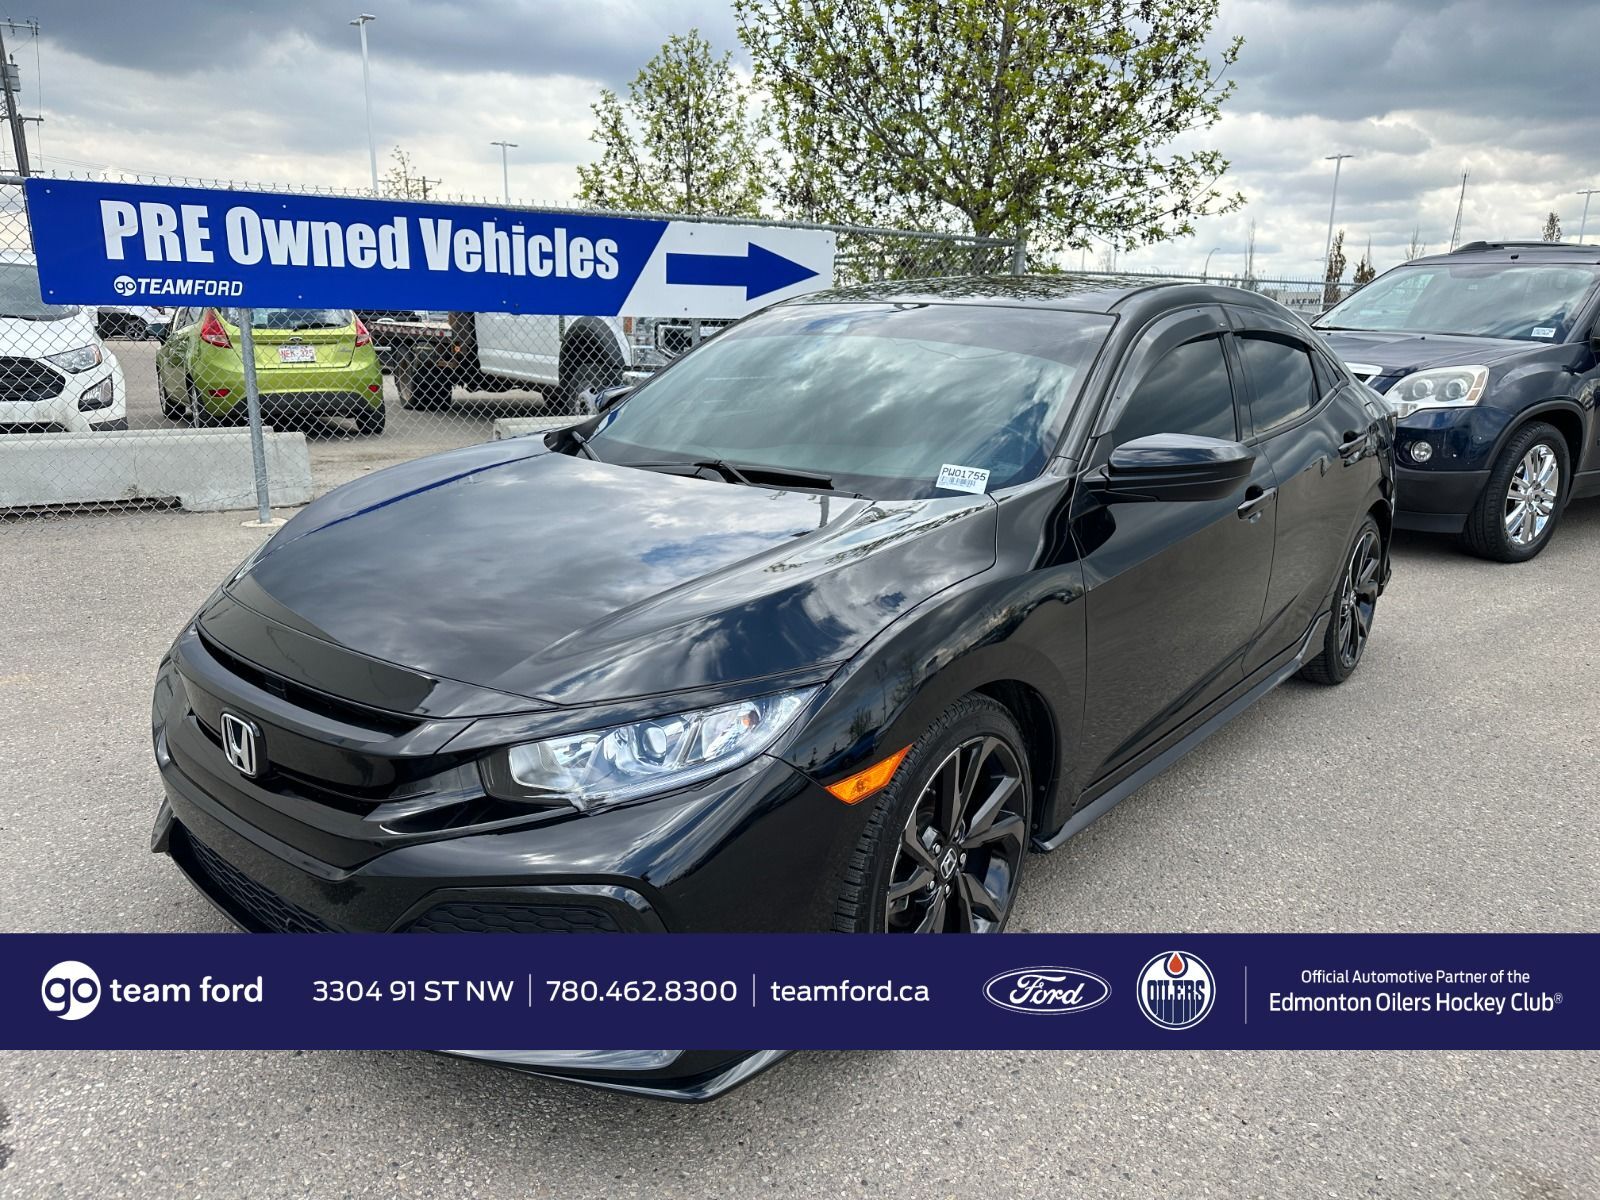 2019 Honda Civic Hatchback SPORT- LEATHER, HEATED SEATS, BLUETOOTH MUCH MORE!